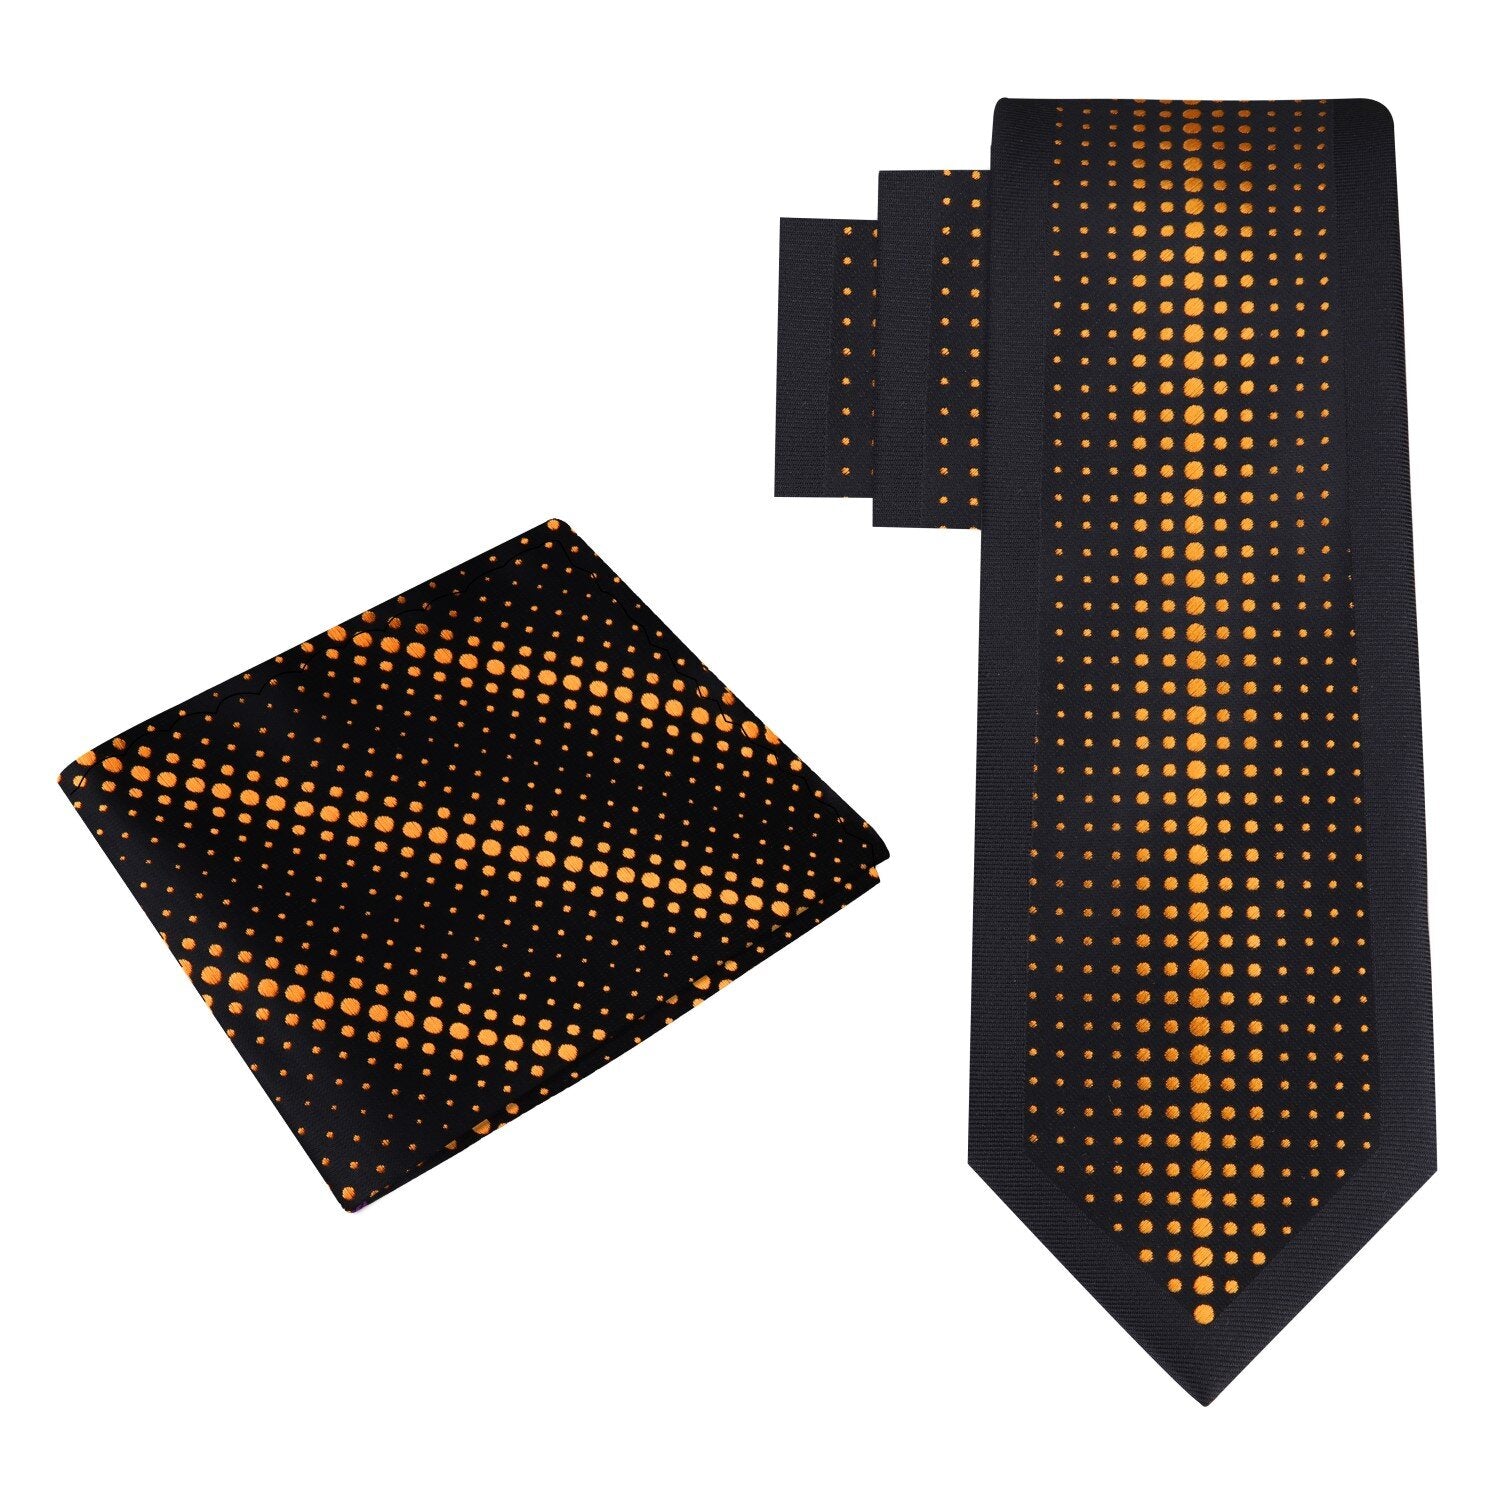 Alternative View: Gold, Black Dots Tie and Pocket Square